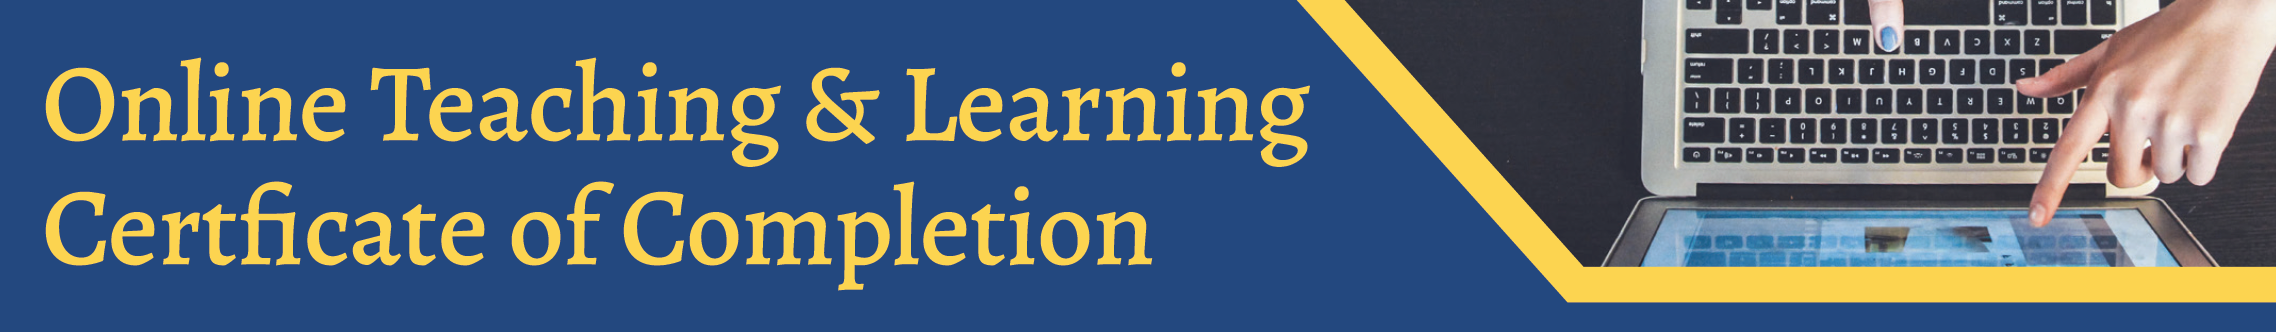 Online Teaching & Learning Certificate of Completion banner